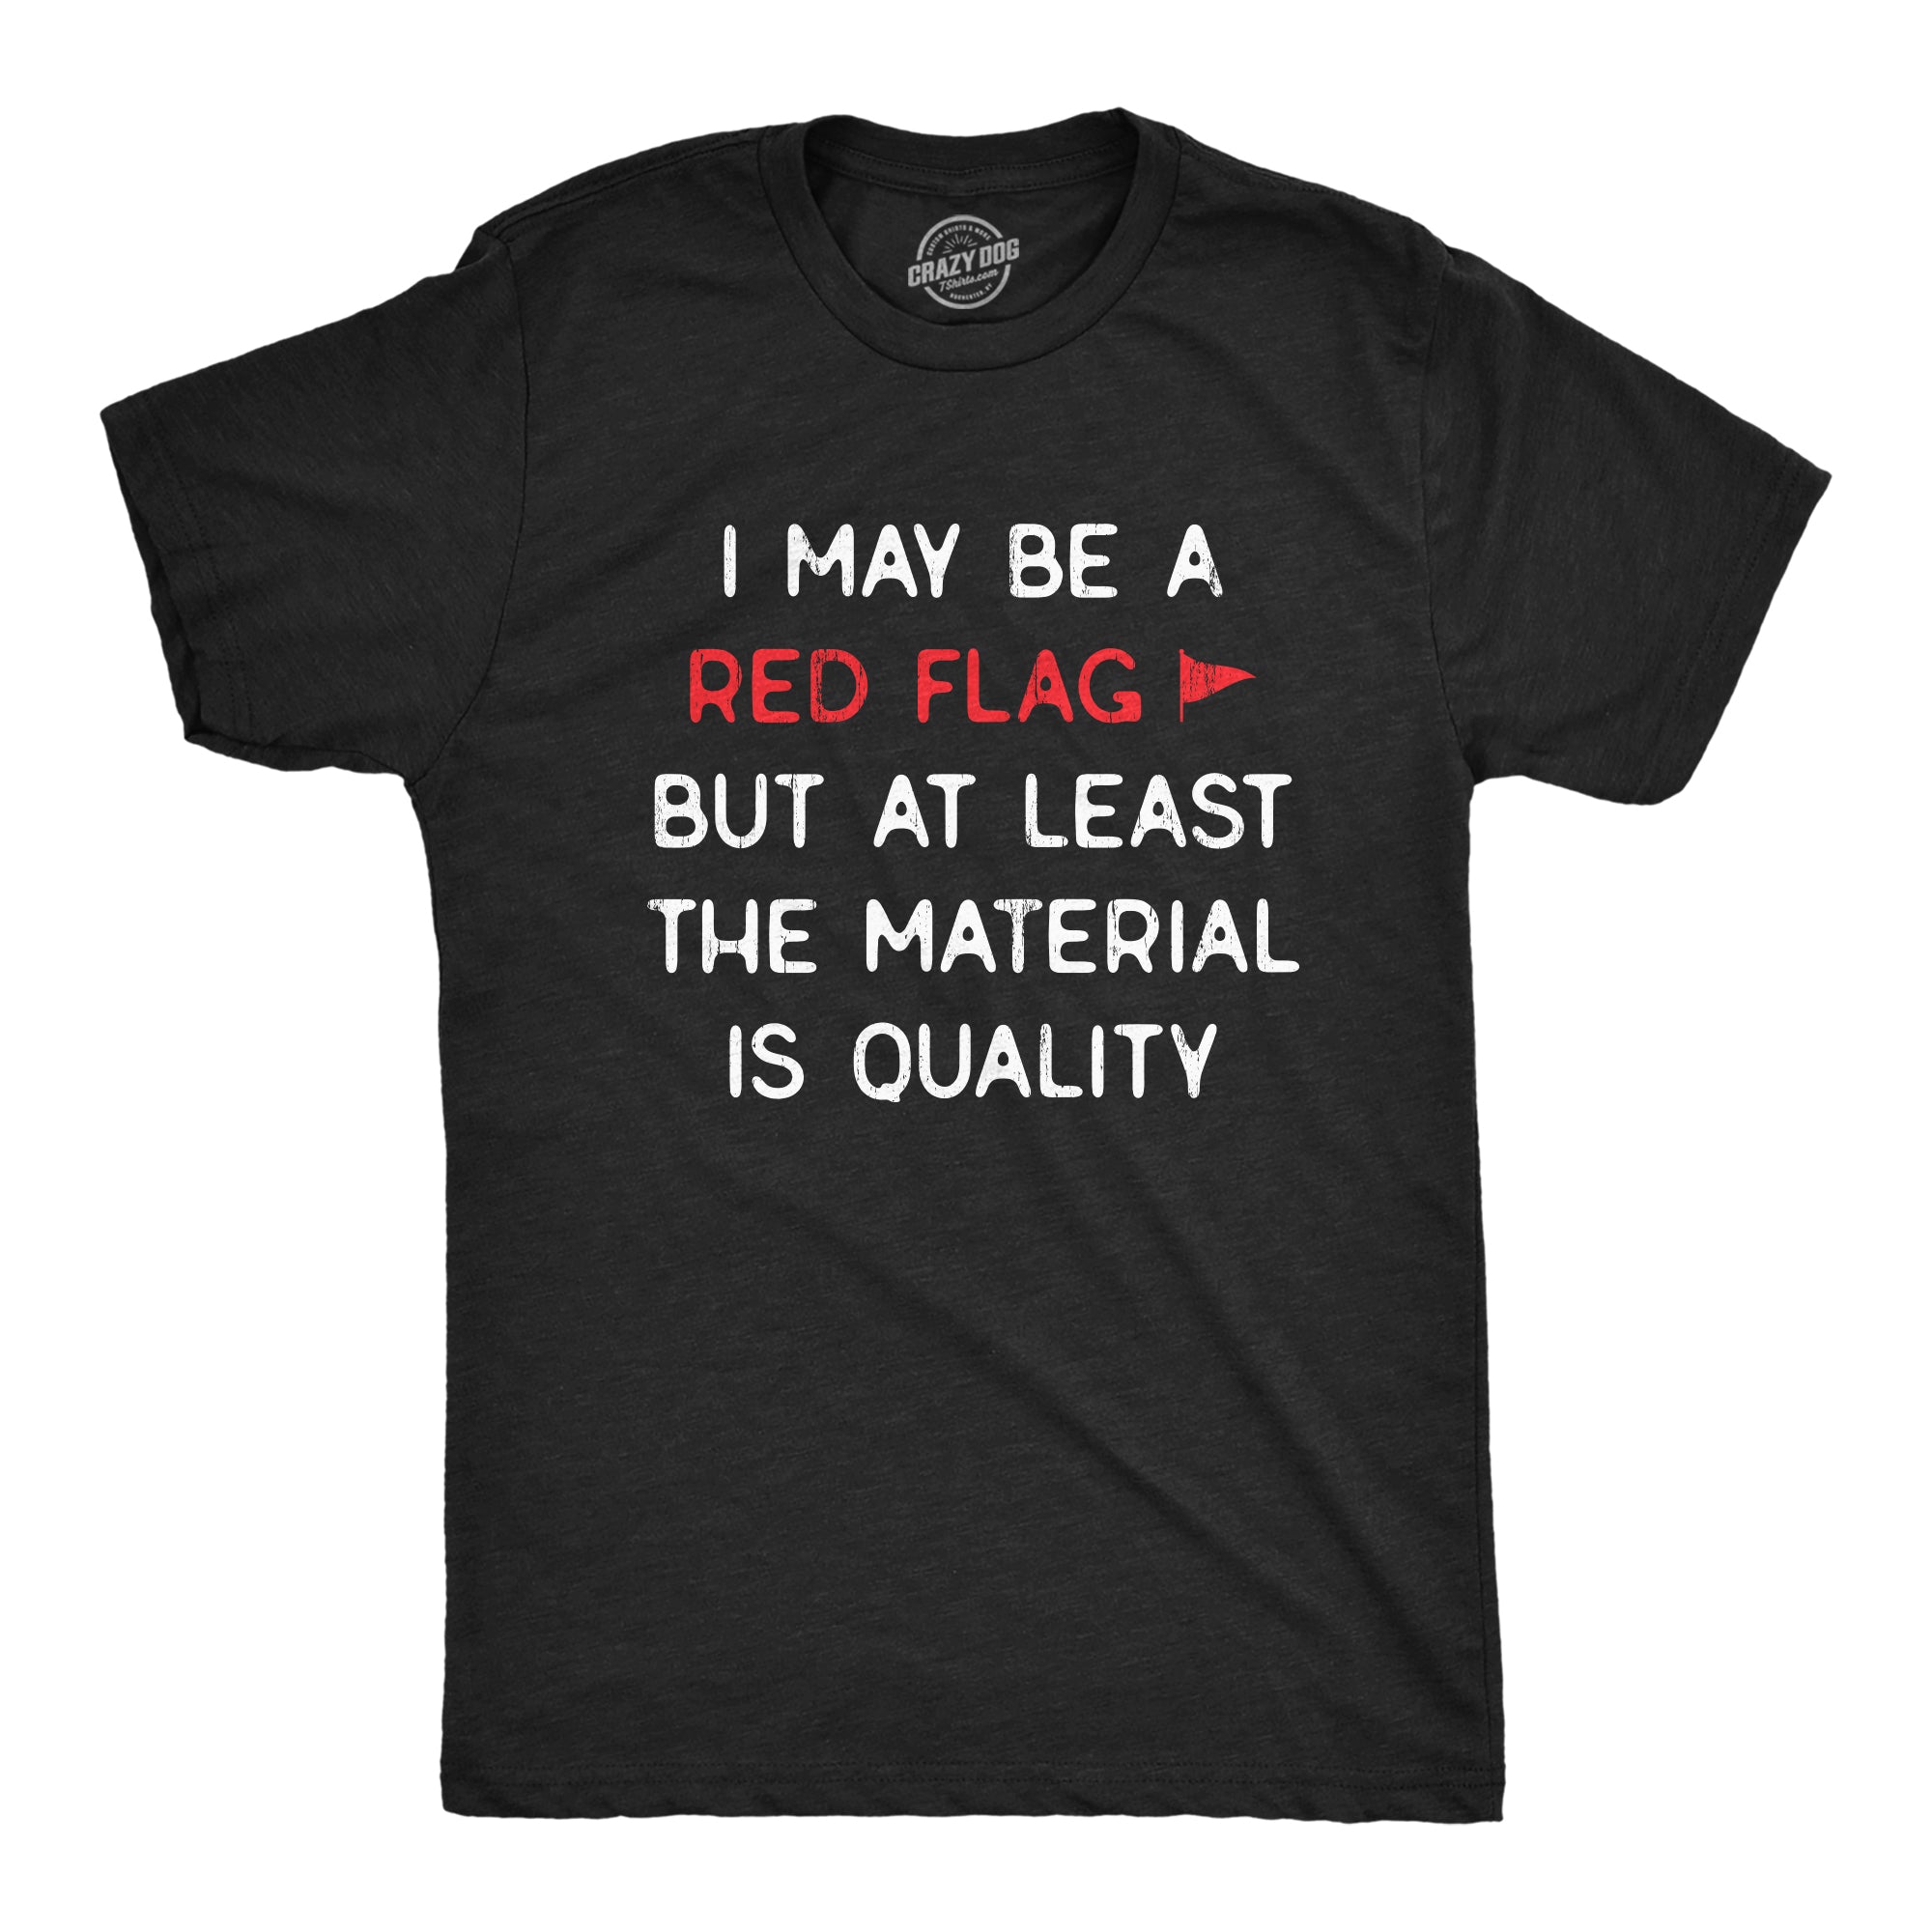 Funny Heather Black I May Be A Red Flag But At Least The Material Is Quality Mens T Shirt Nerdy Sarcastic Tee